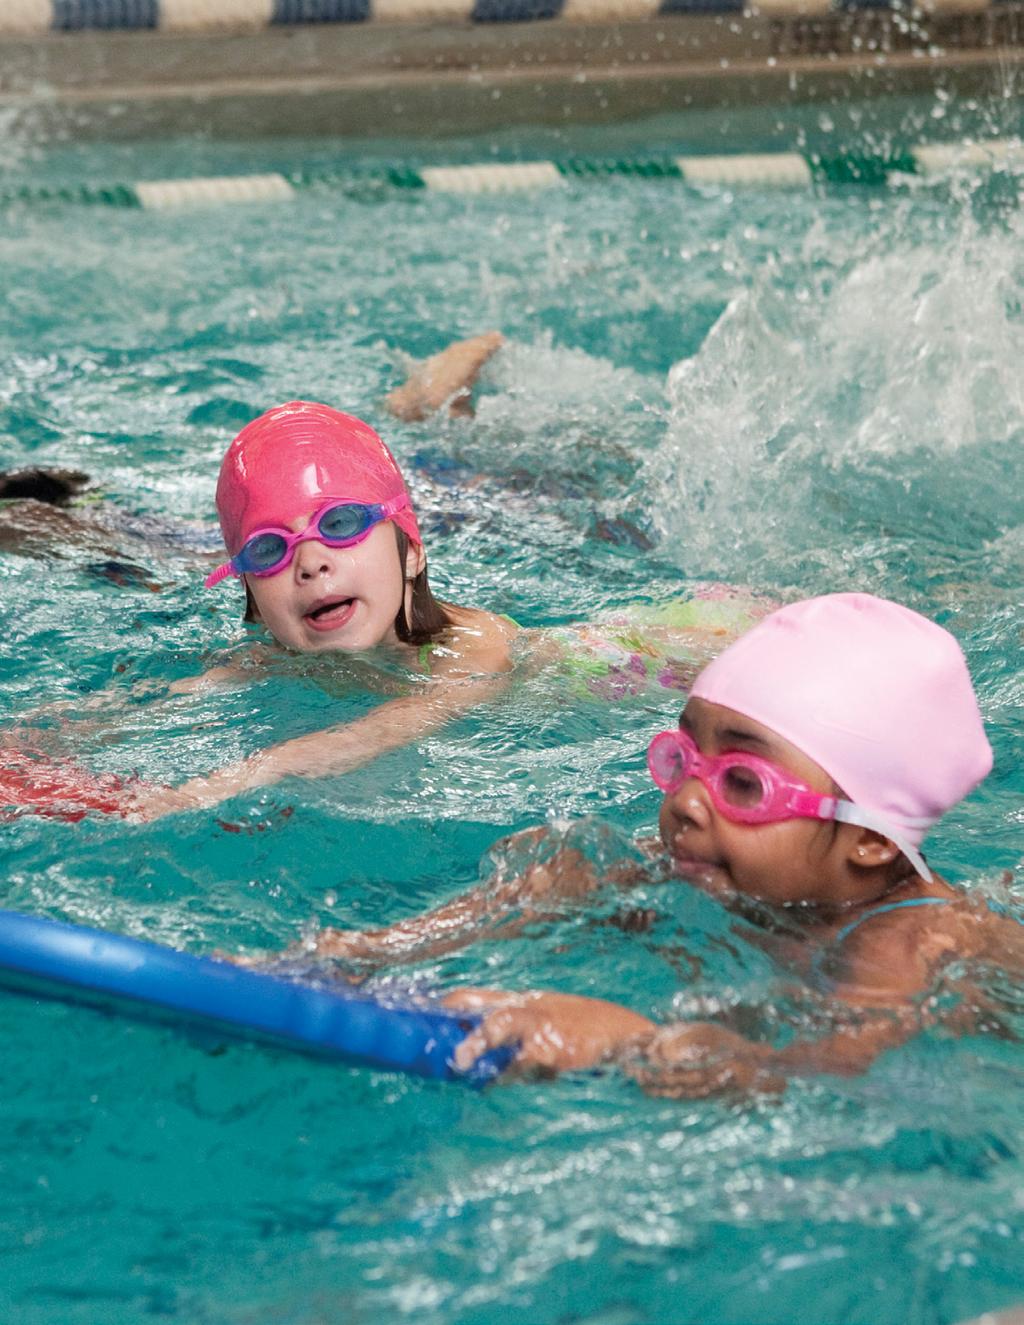 SWIM Swimming is a life skill, great exercise, and a challenging sport.